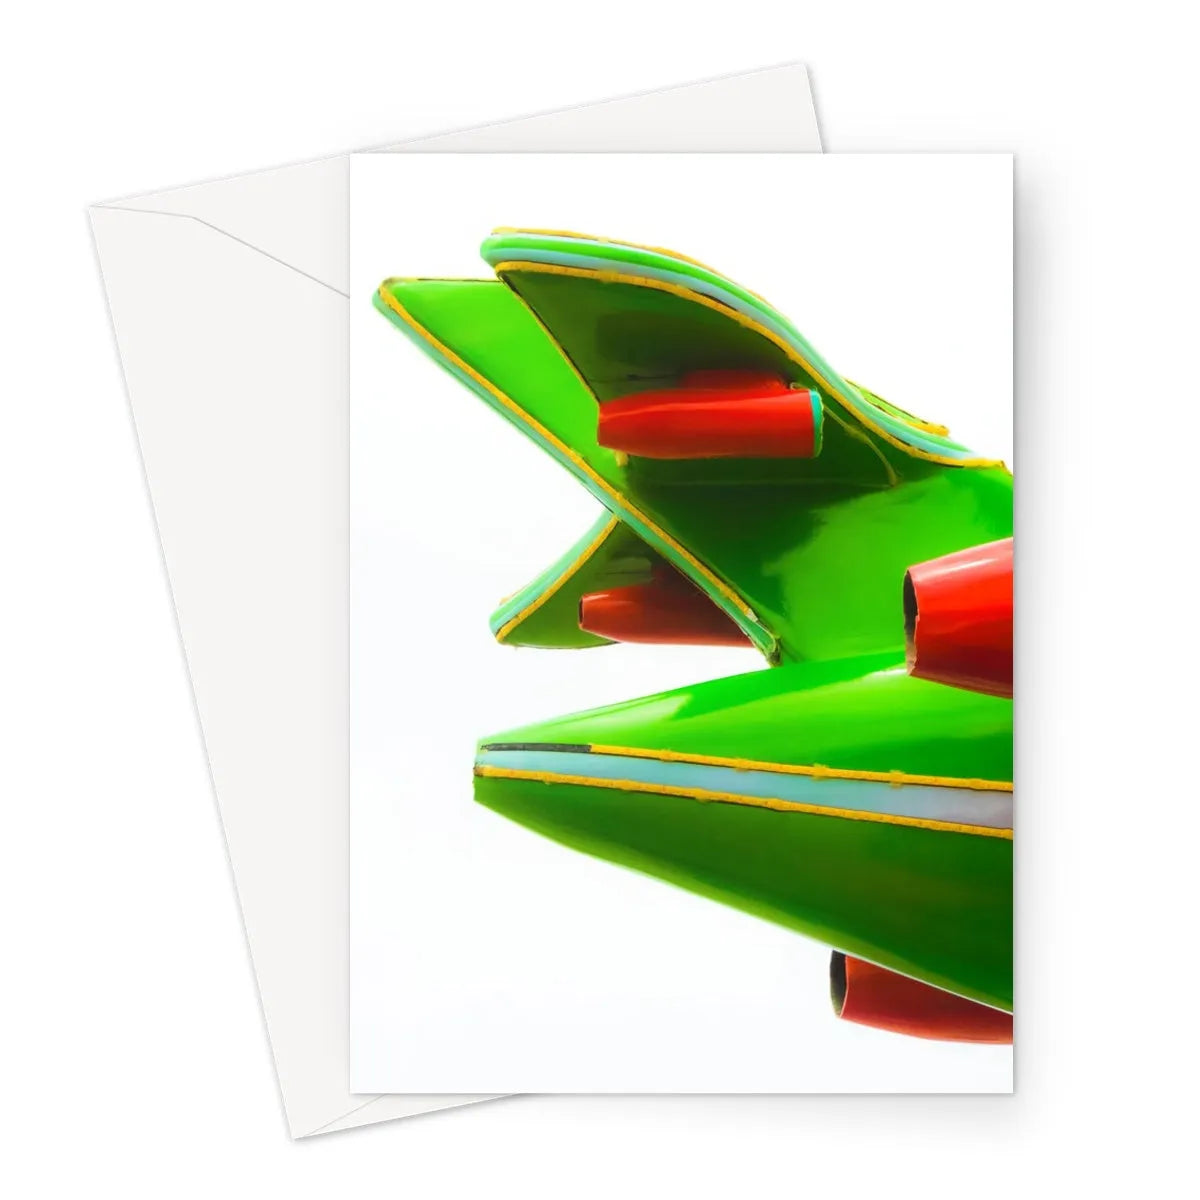 Flying Highest Greeting Card - A5 Portrait / 1 Card - Greeting & Note Cards - Aesthetic Art